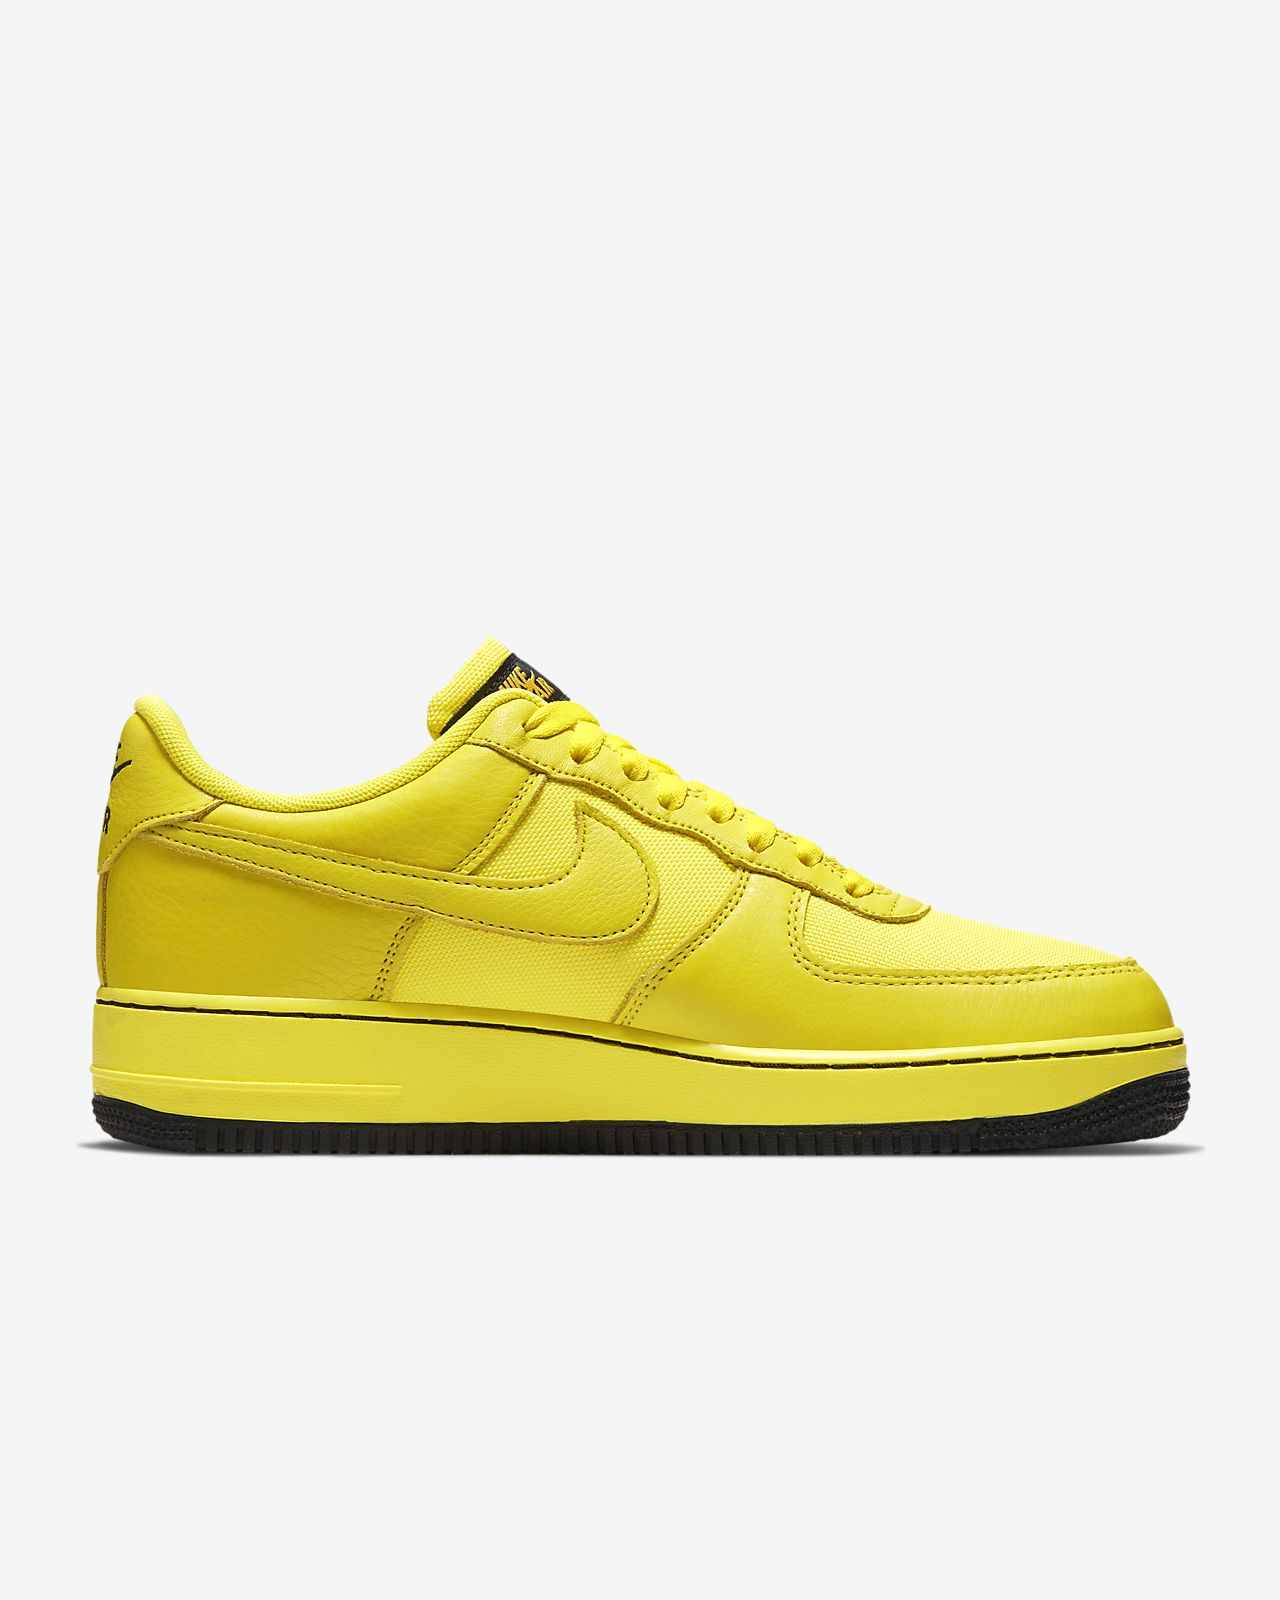 nike air force 1 highlighter yellow